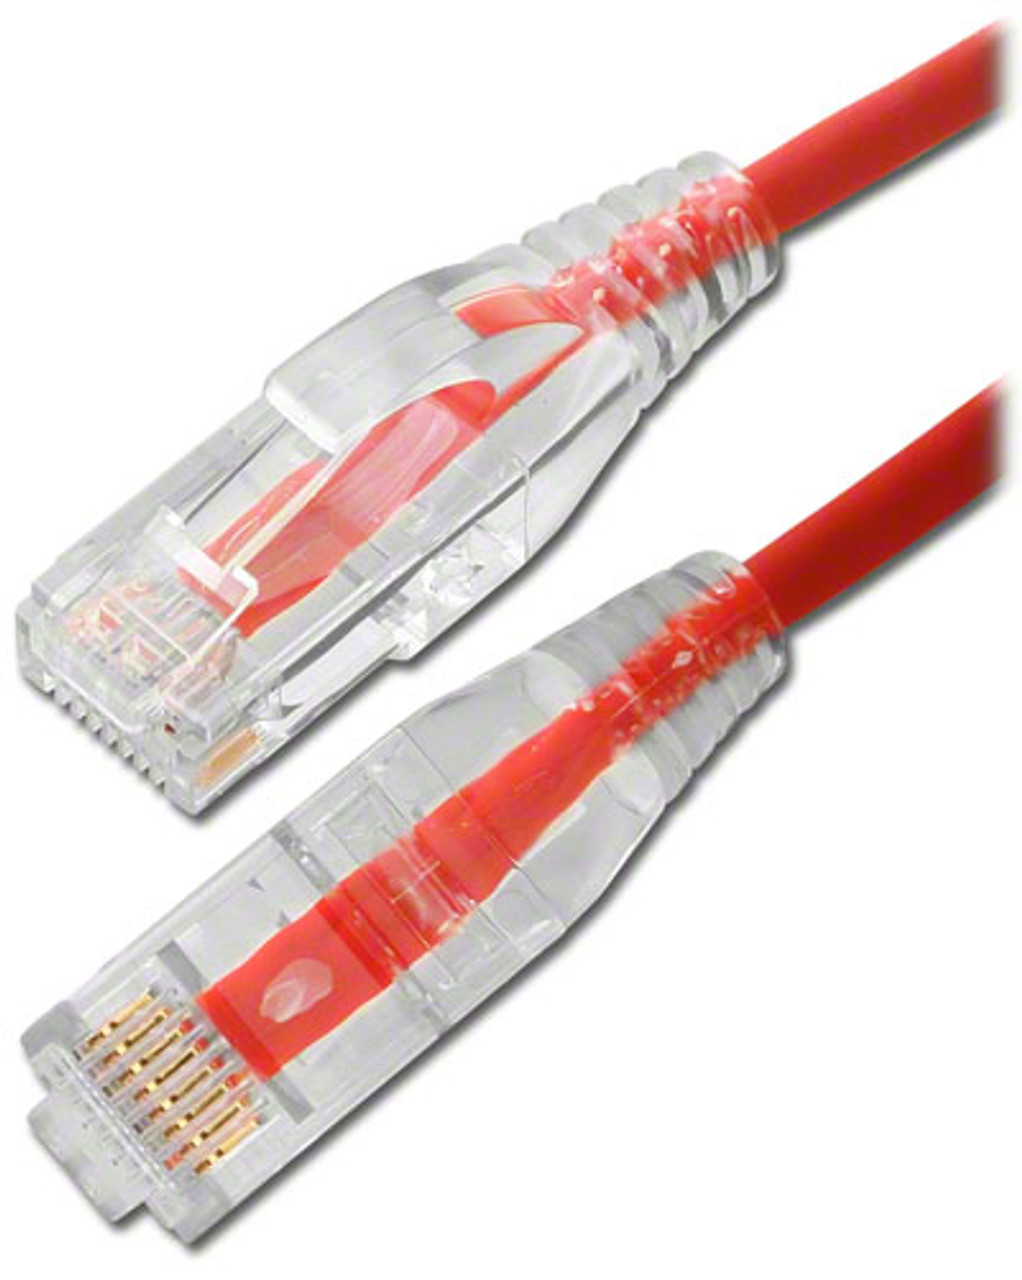 7-FT- Mini Cat 6 Thin Patch Cable - Red Jacket - DC-56NP-7'RDTB - TMB